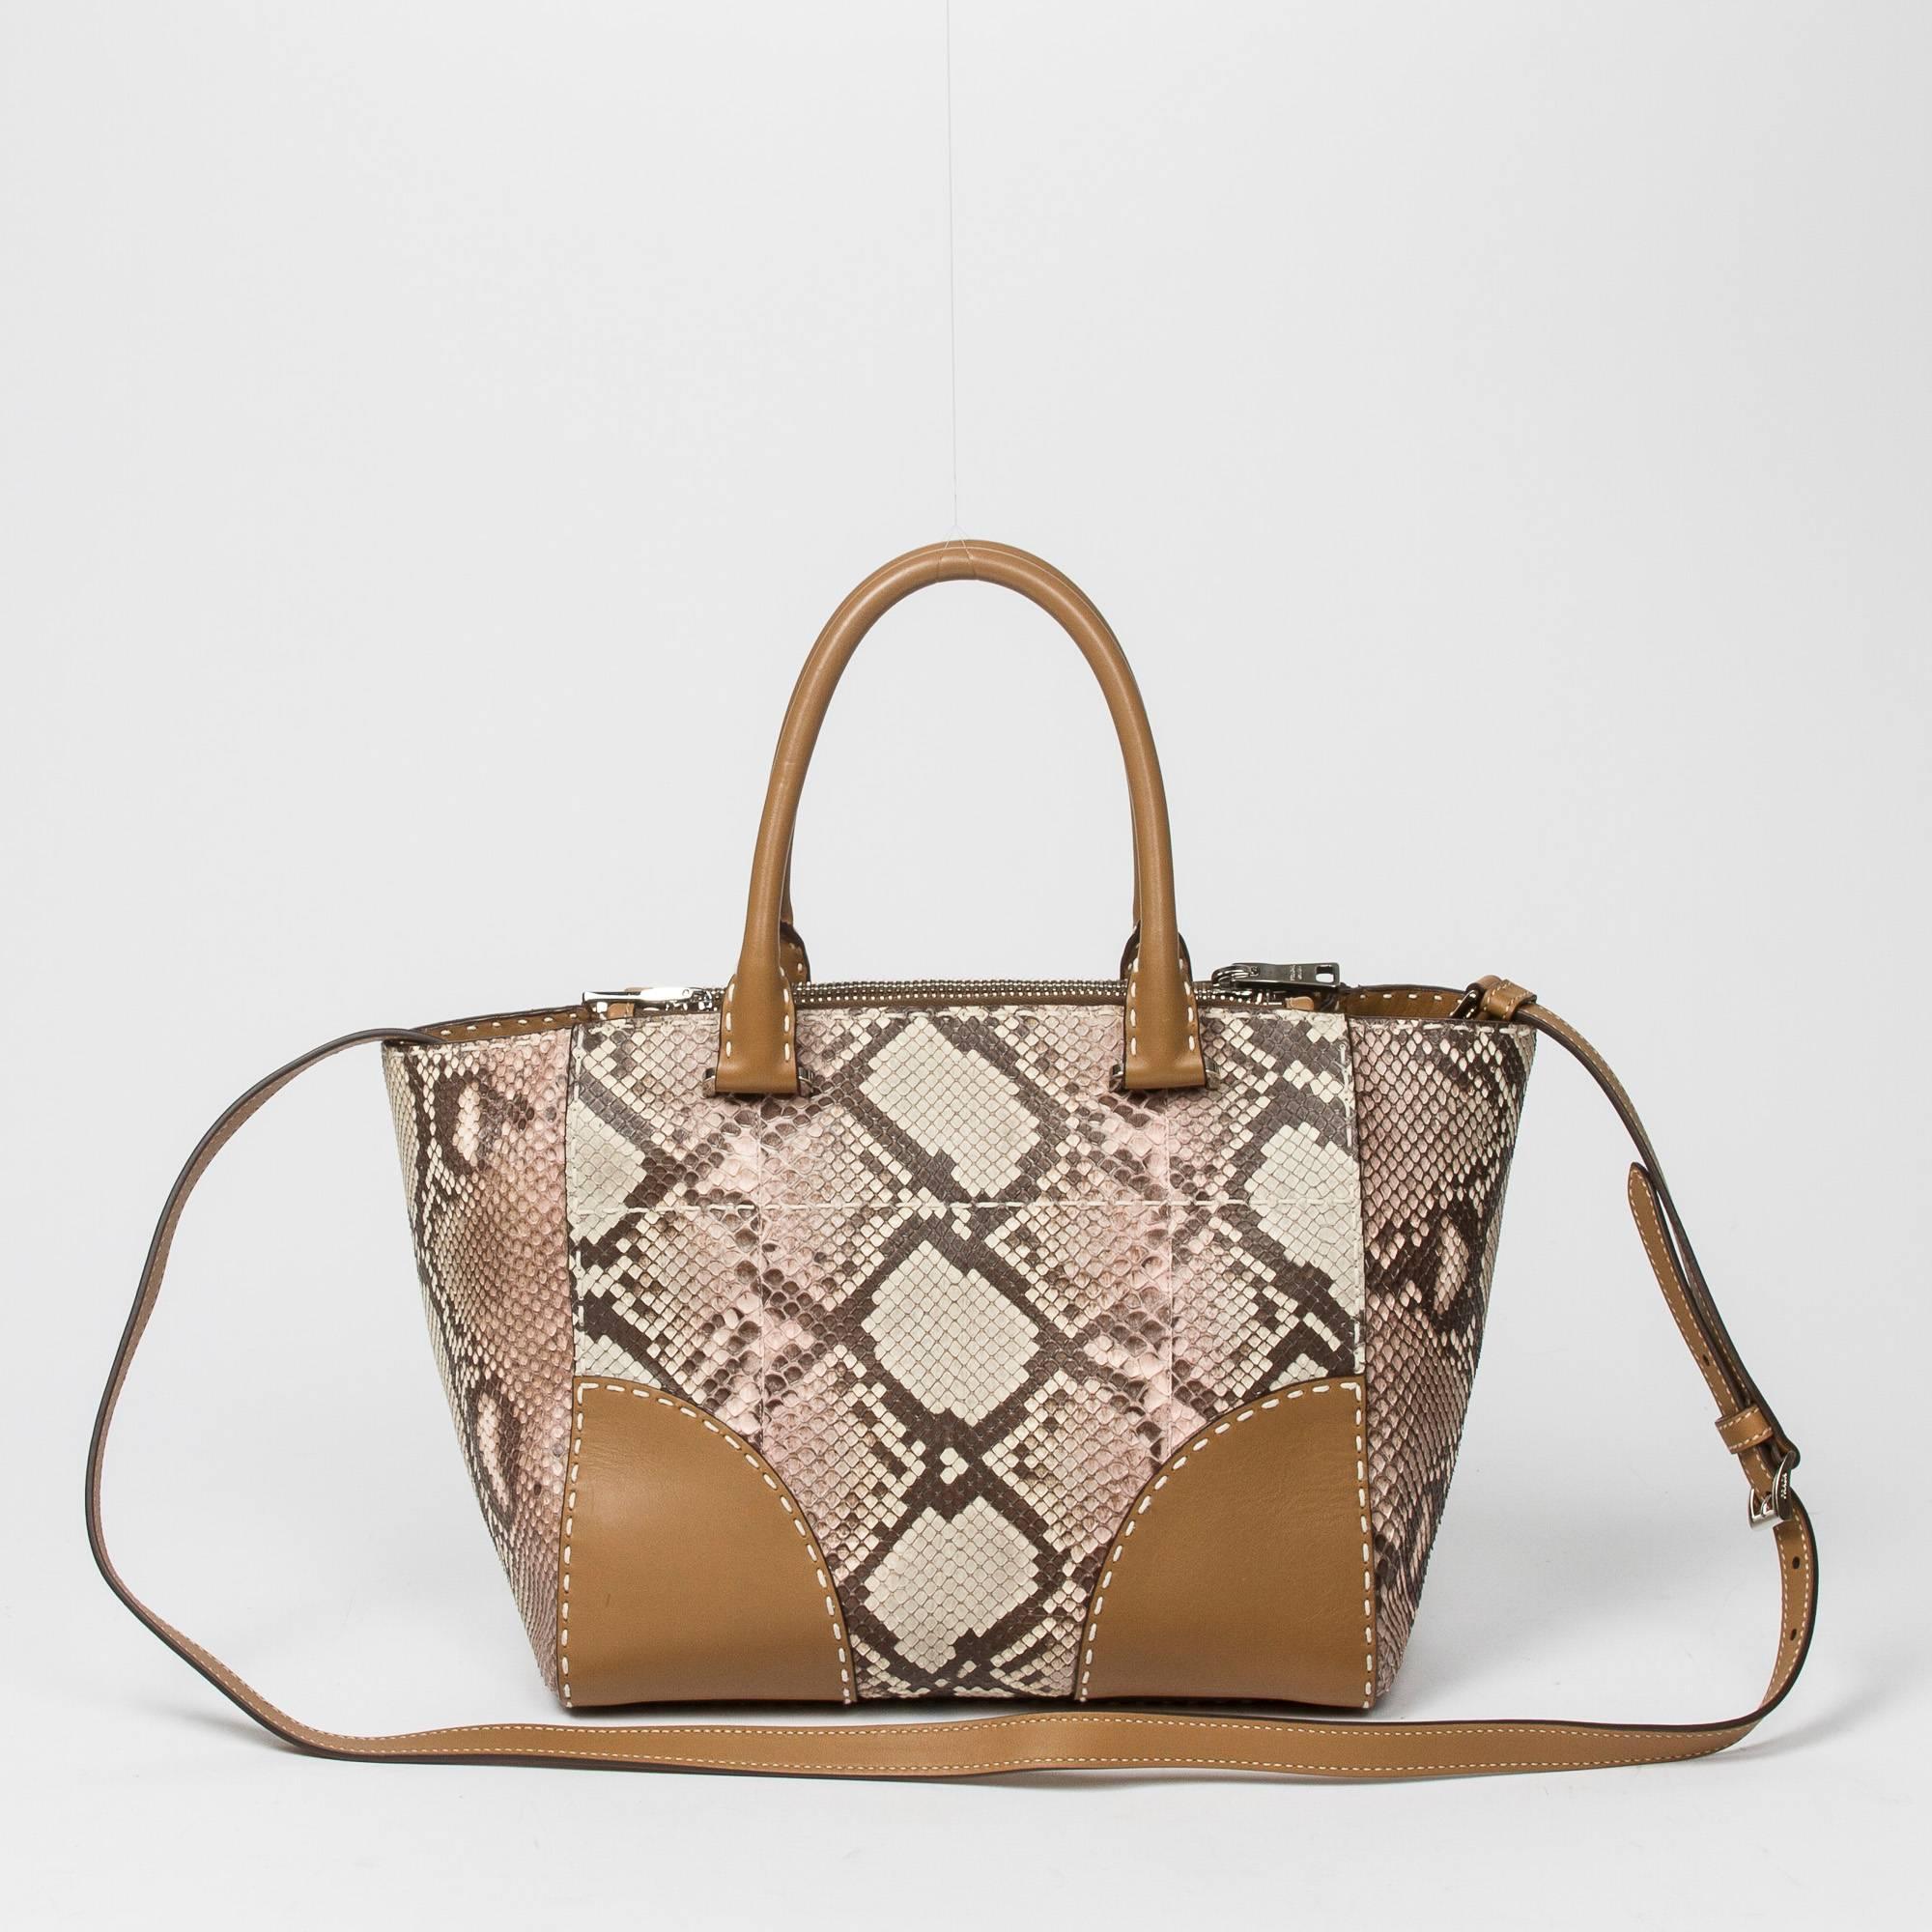 Prada Tote in Beige/Ivory/Brown python leather 1